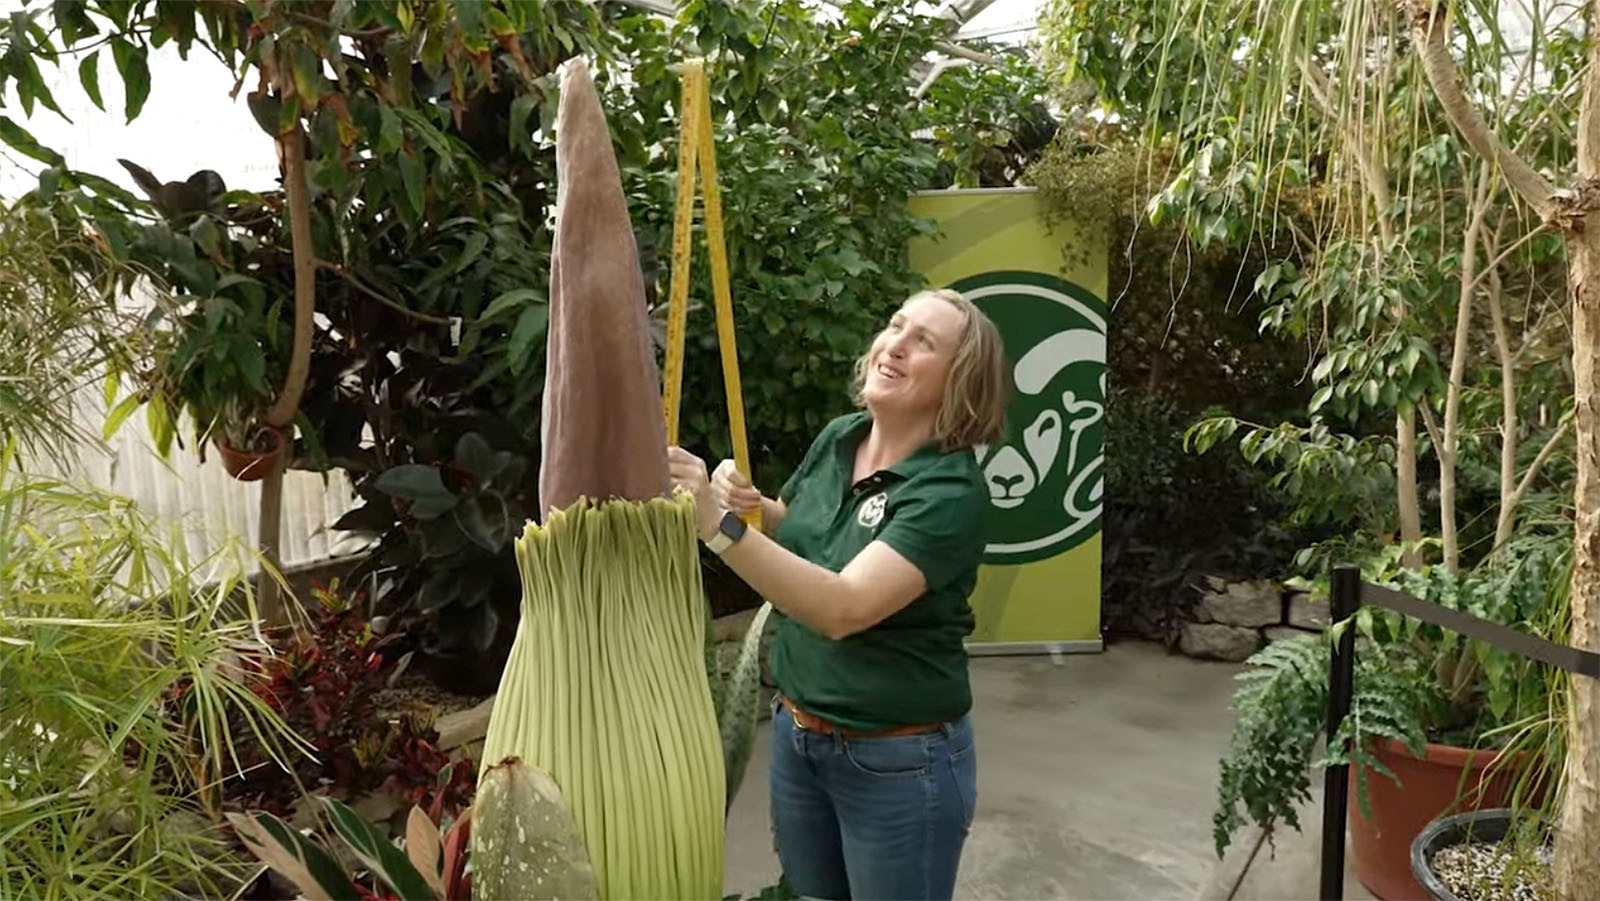 The folks at Colorado State University are excited for its corpse flower to bloom for the first time over the Memorial Day weekend. Here, Tammy Brenner, CSU's plant growth facility manager, measures the flower, which grows several inches a day leading up to its infrequent blooms, generally years apart.